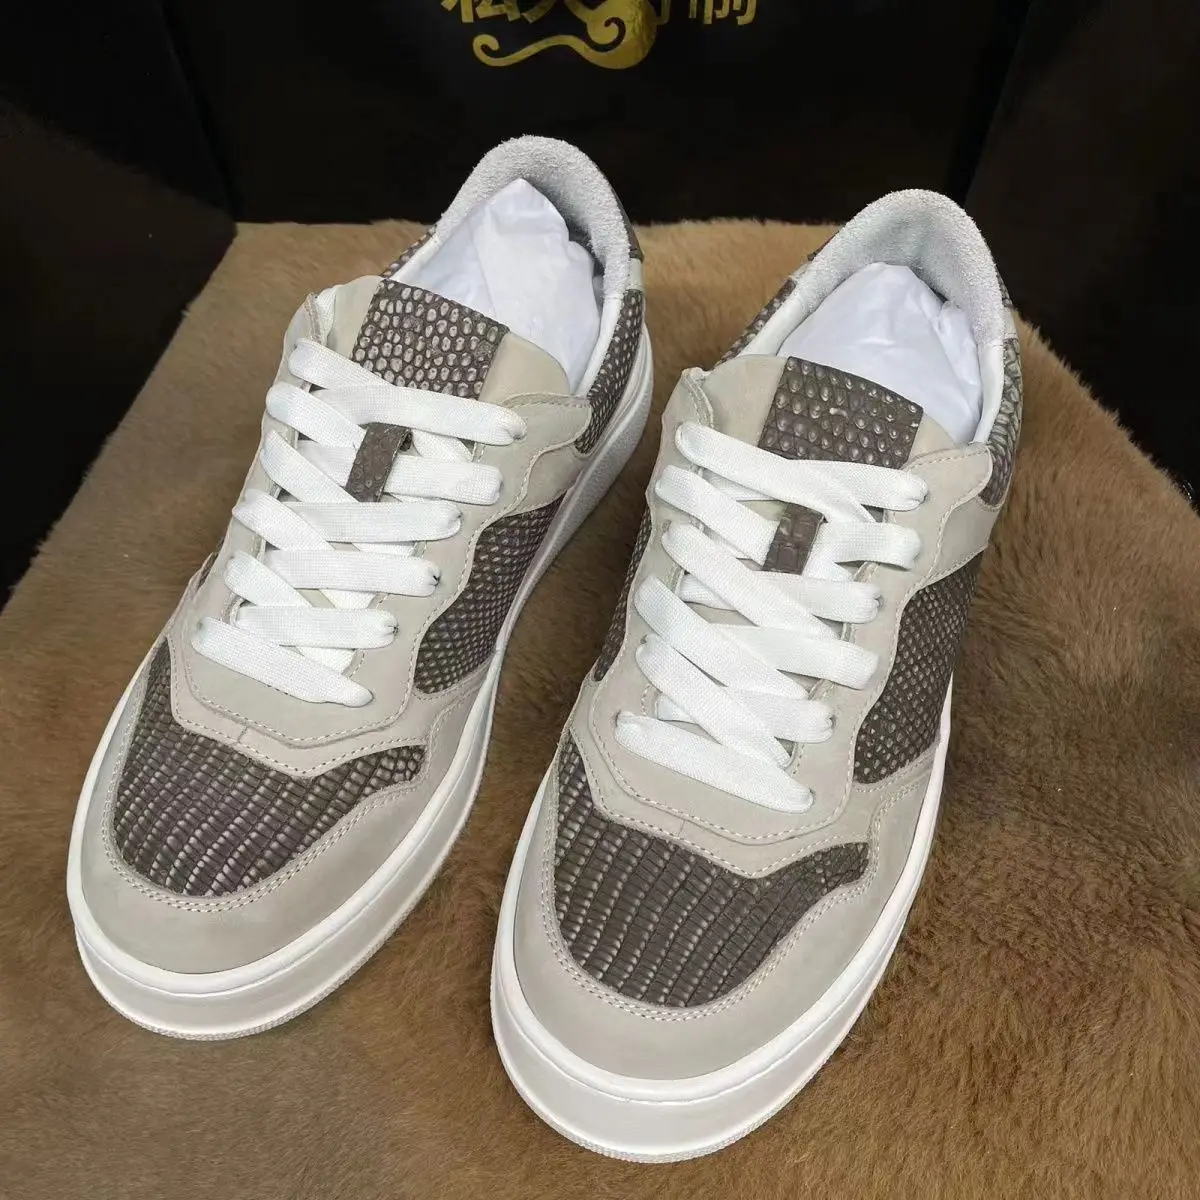 O 2023 new arrival fashion lizard skin cow leather causal shoes men male sneaker pdd209 thumb200